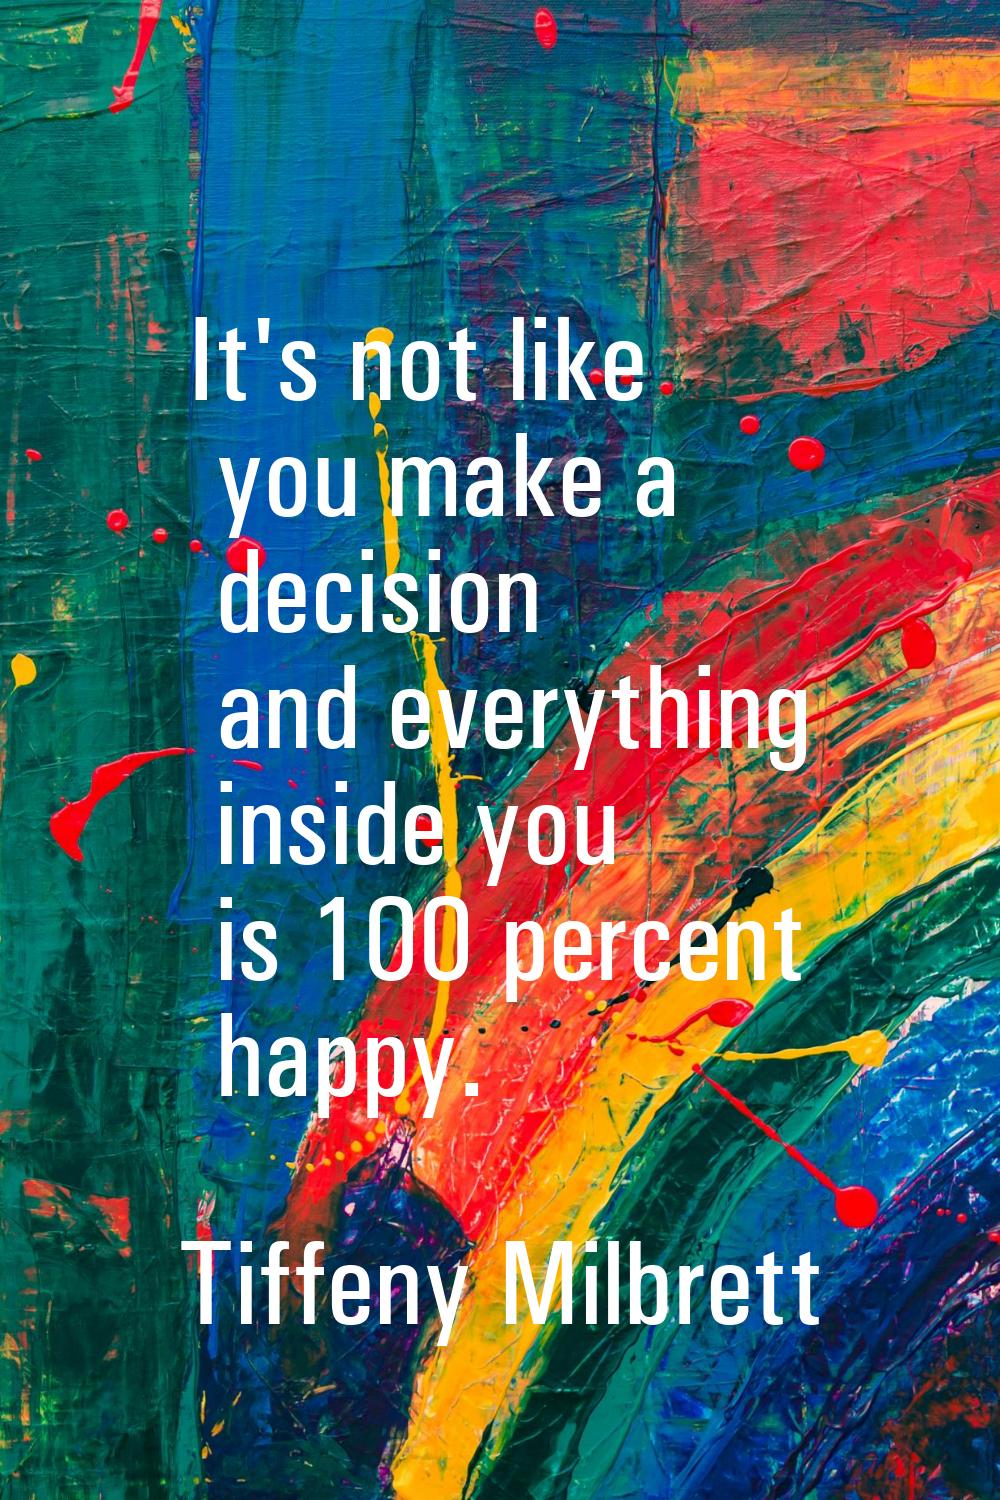 It's not like you make a decision and everything inside you is 100 percent happy.